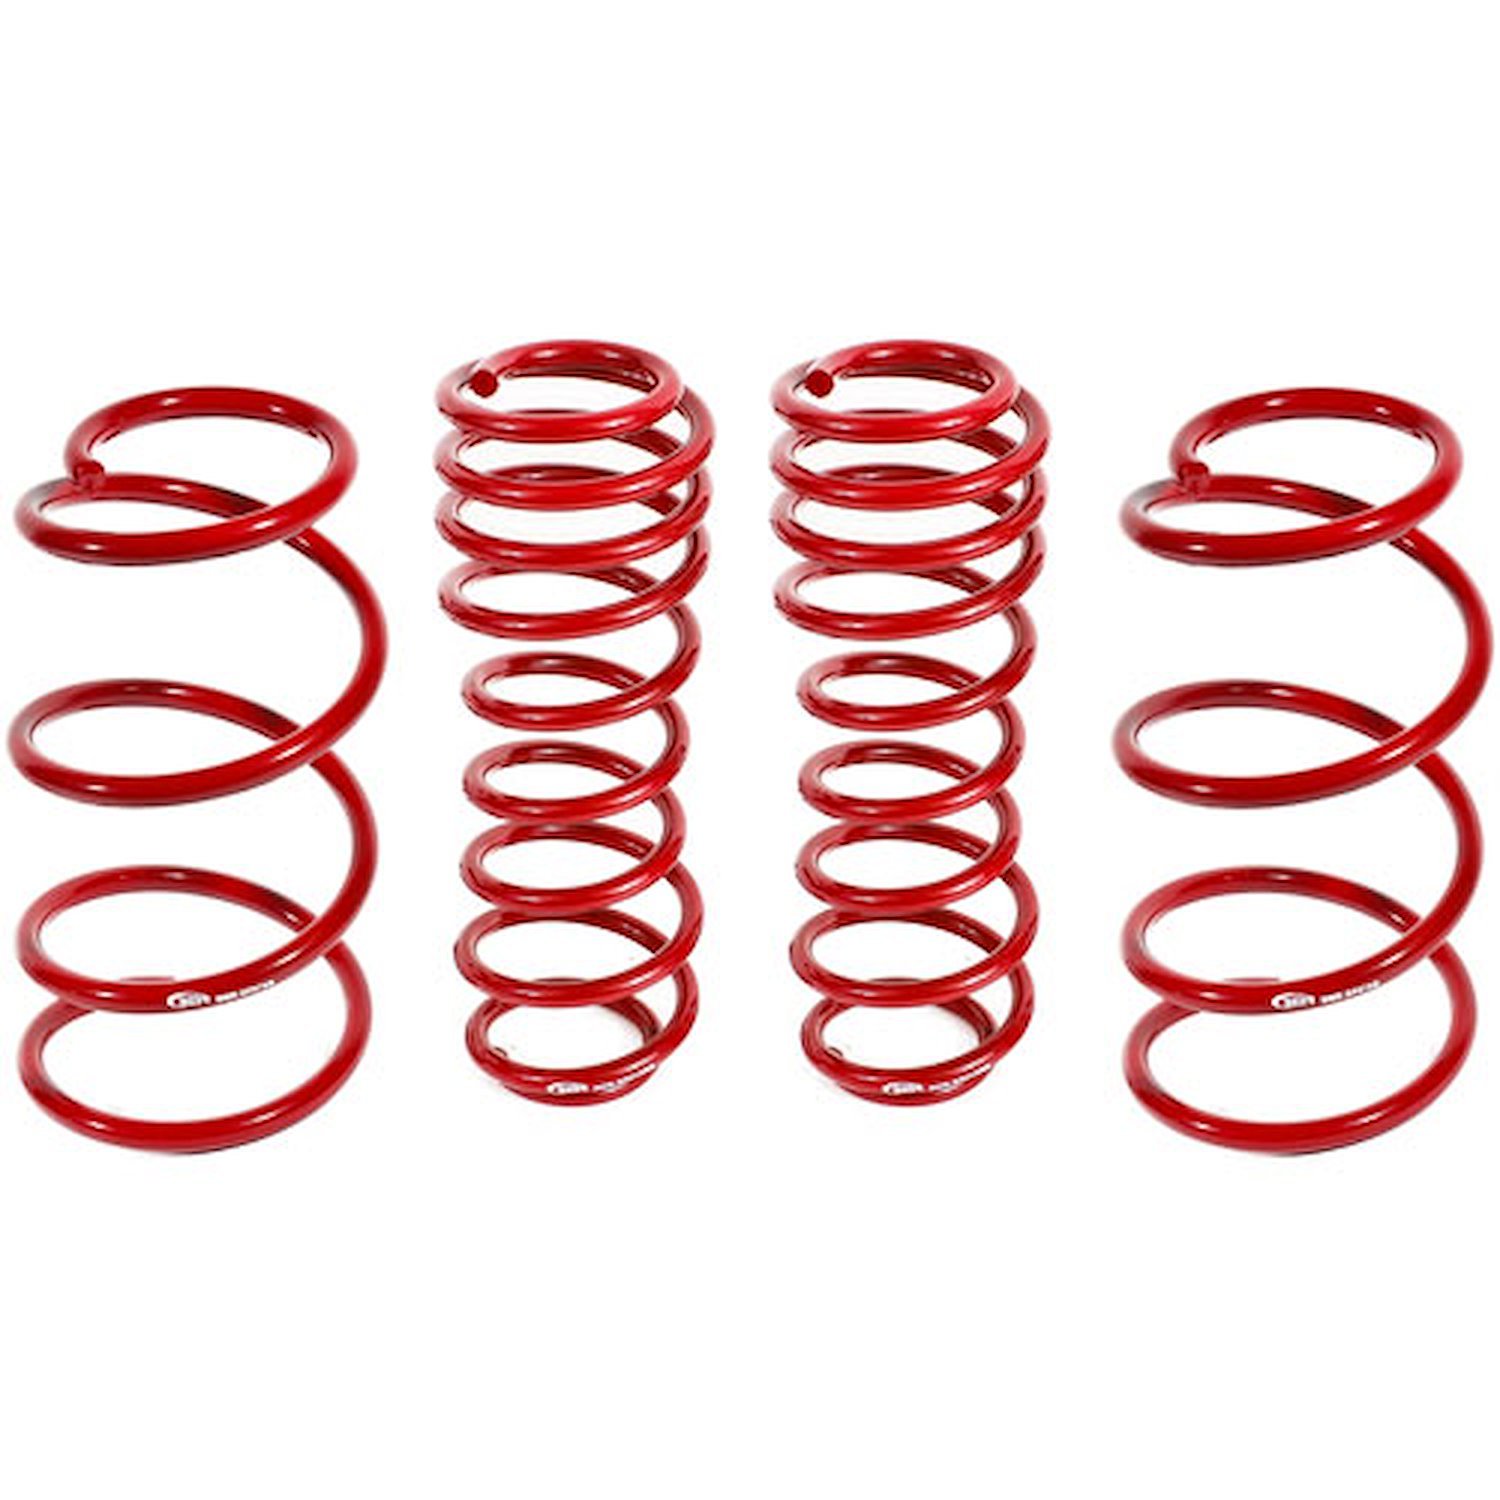 Drag Style Lowering Spring Kit 2007-14 Mustang Shelby GT500